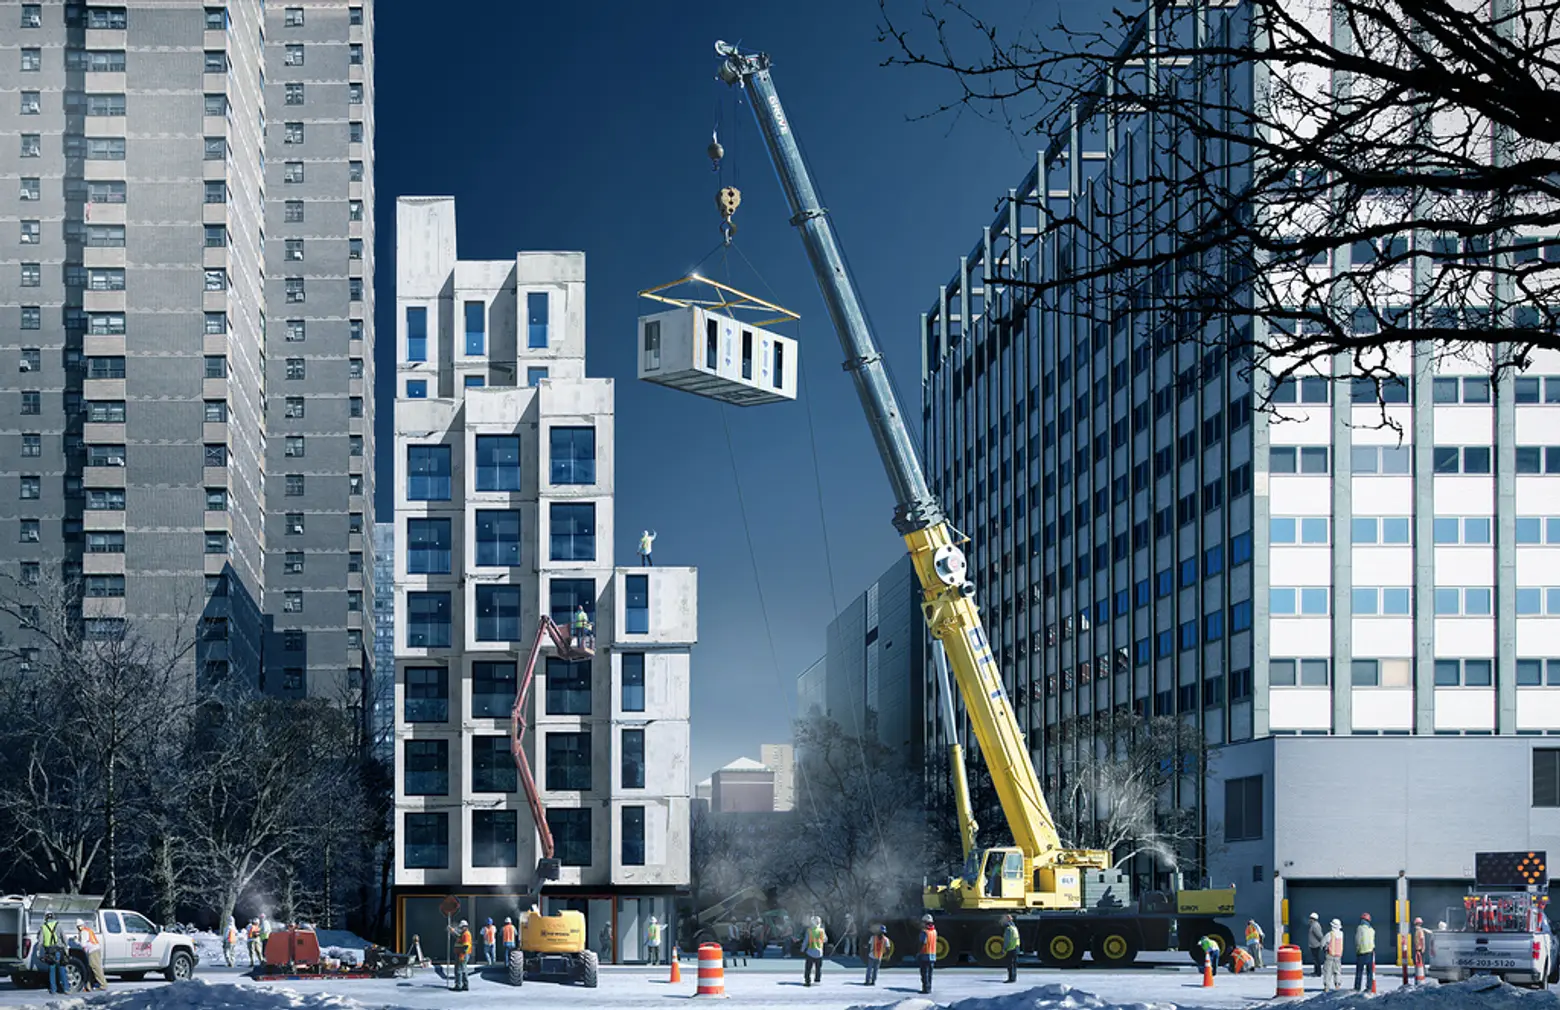 Listings Go Live Today for NYC’s First Micro Apartment Complex